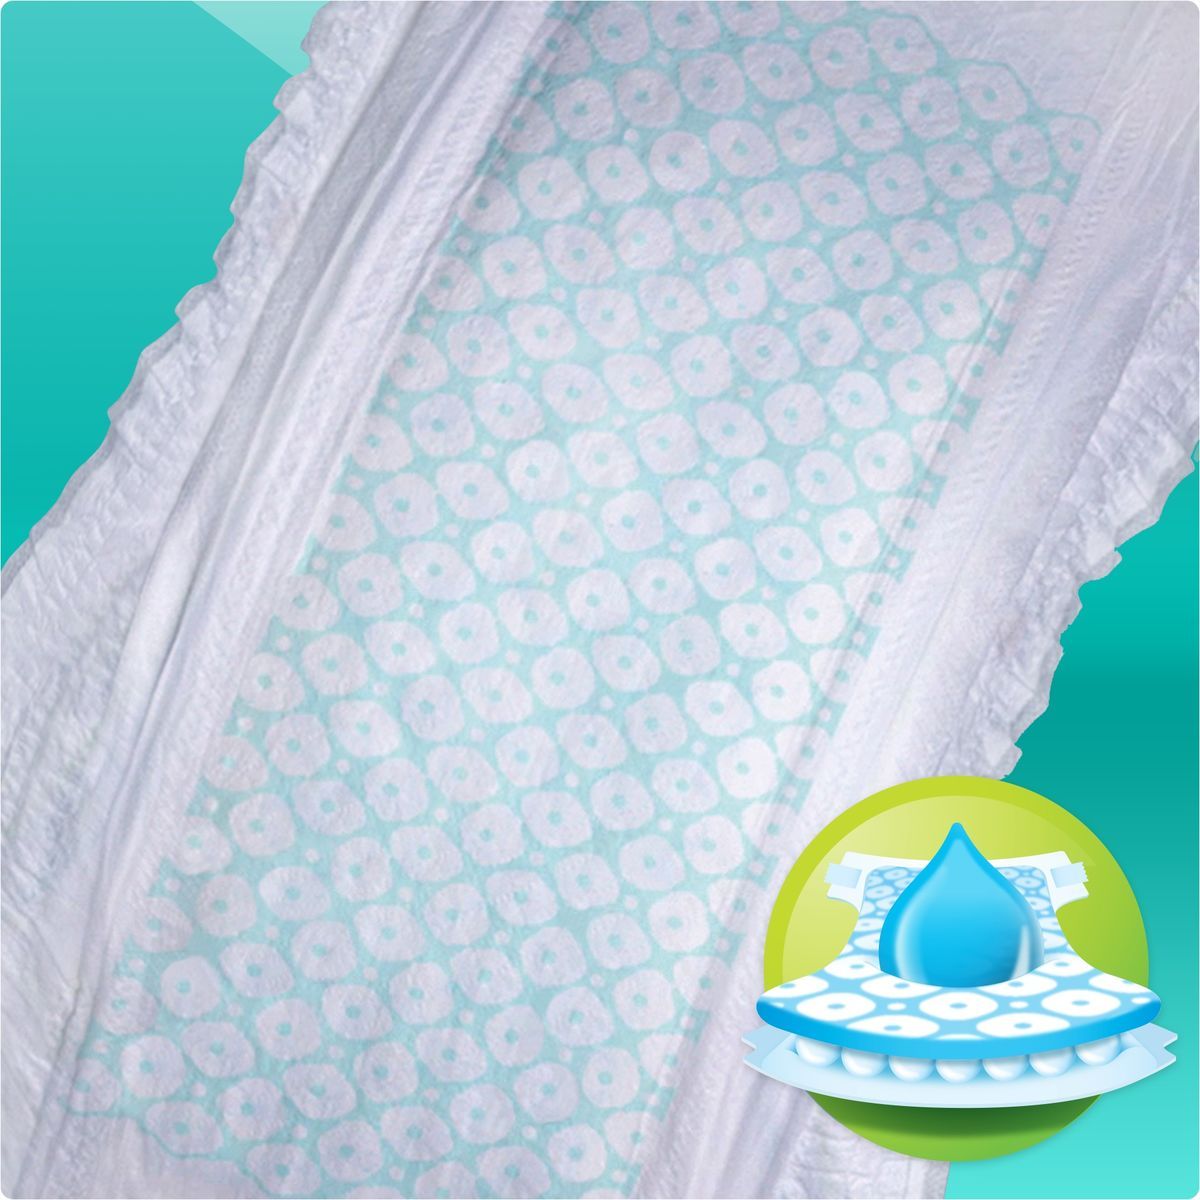 Pampers  Active Baby-Dry 5-9  ( 3) 152 